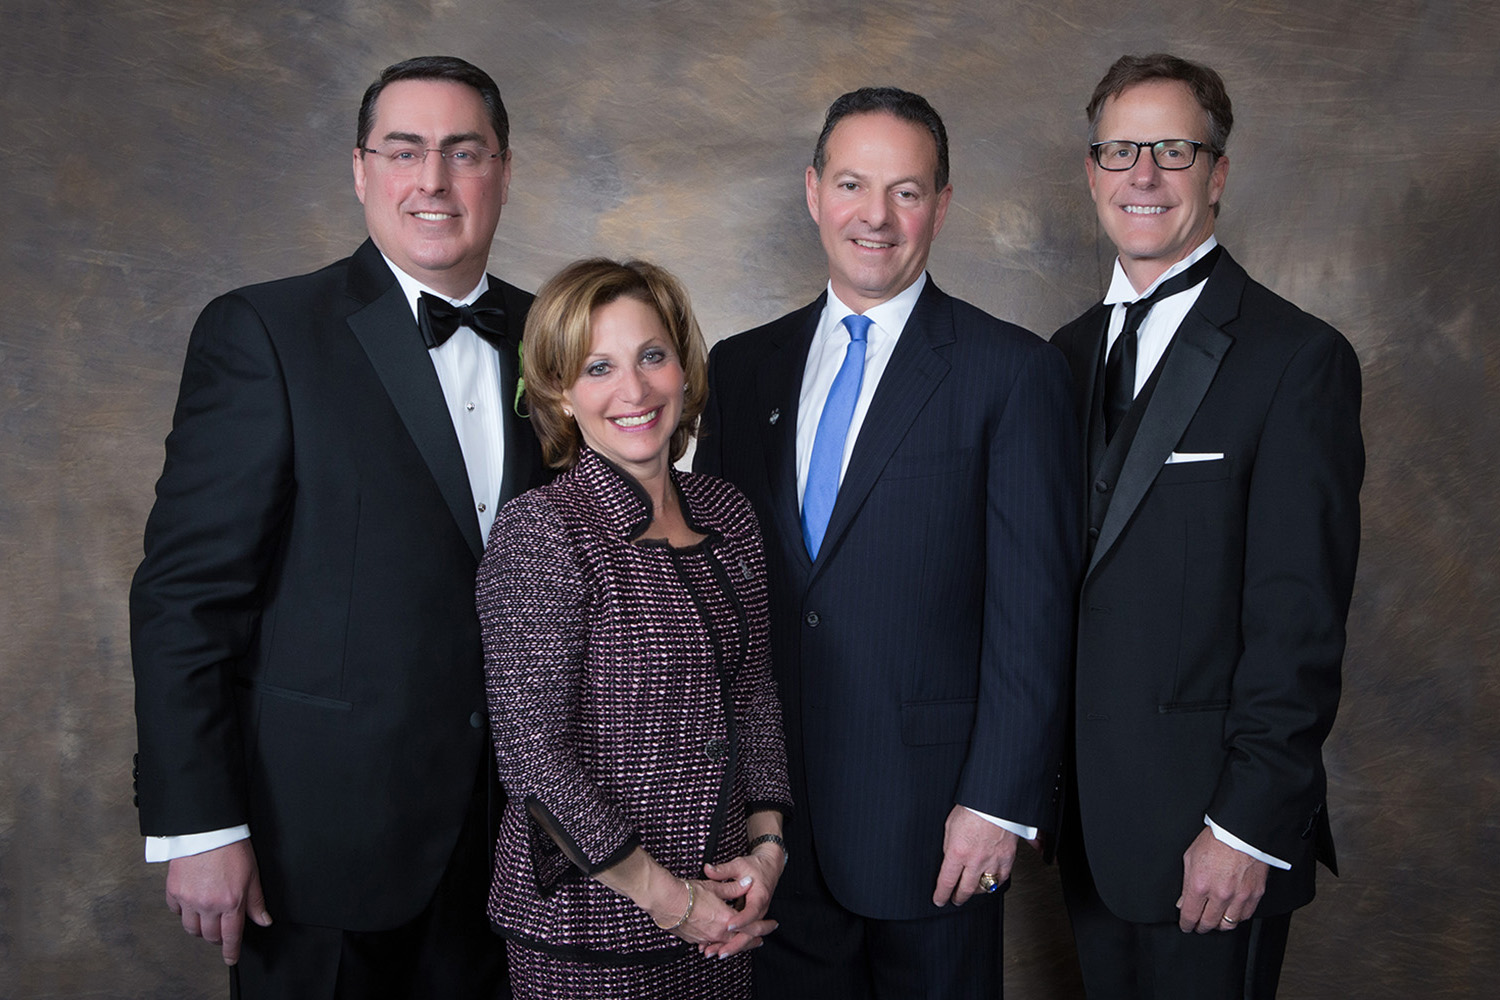 2017 Inductees to the UConn School of Business Hall of Fame: George Aylward '88, Shari G. Cantor '81, John P. Malfettone '77, and John R. Fodor '85 (Thomas Hurlbut Photography)